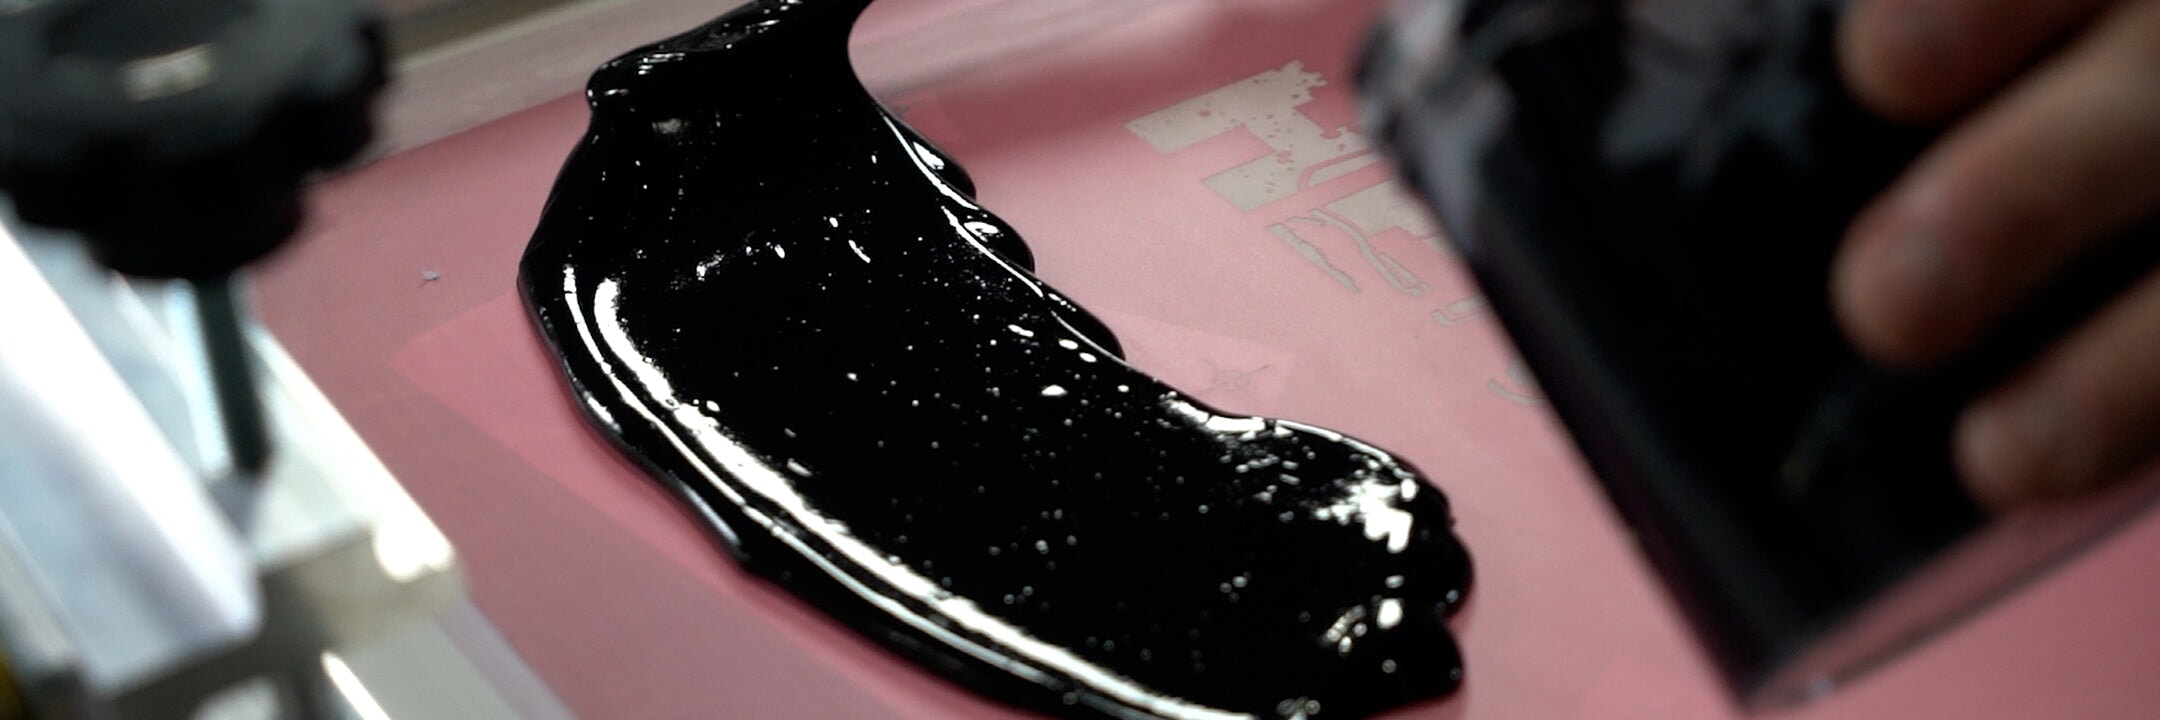 Plastisol vs. Water-Based: Which Ink Is Best for Screen Printing?